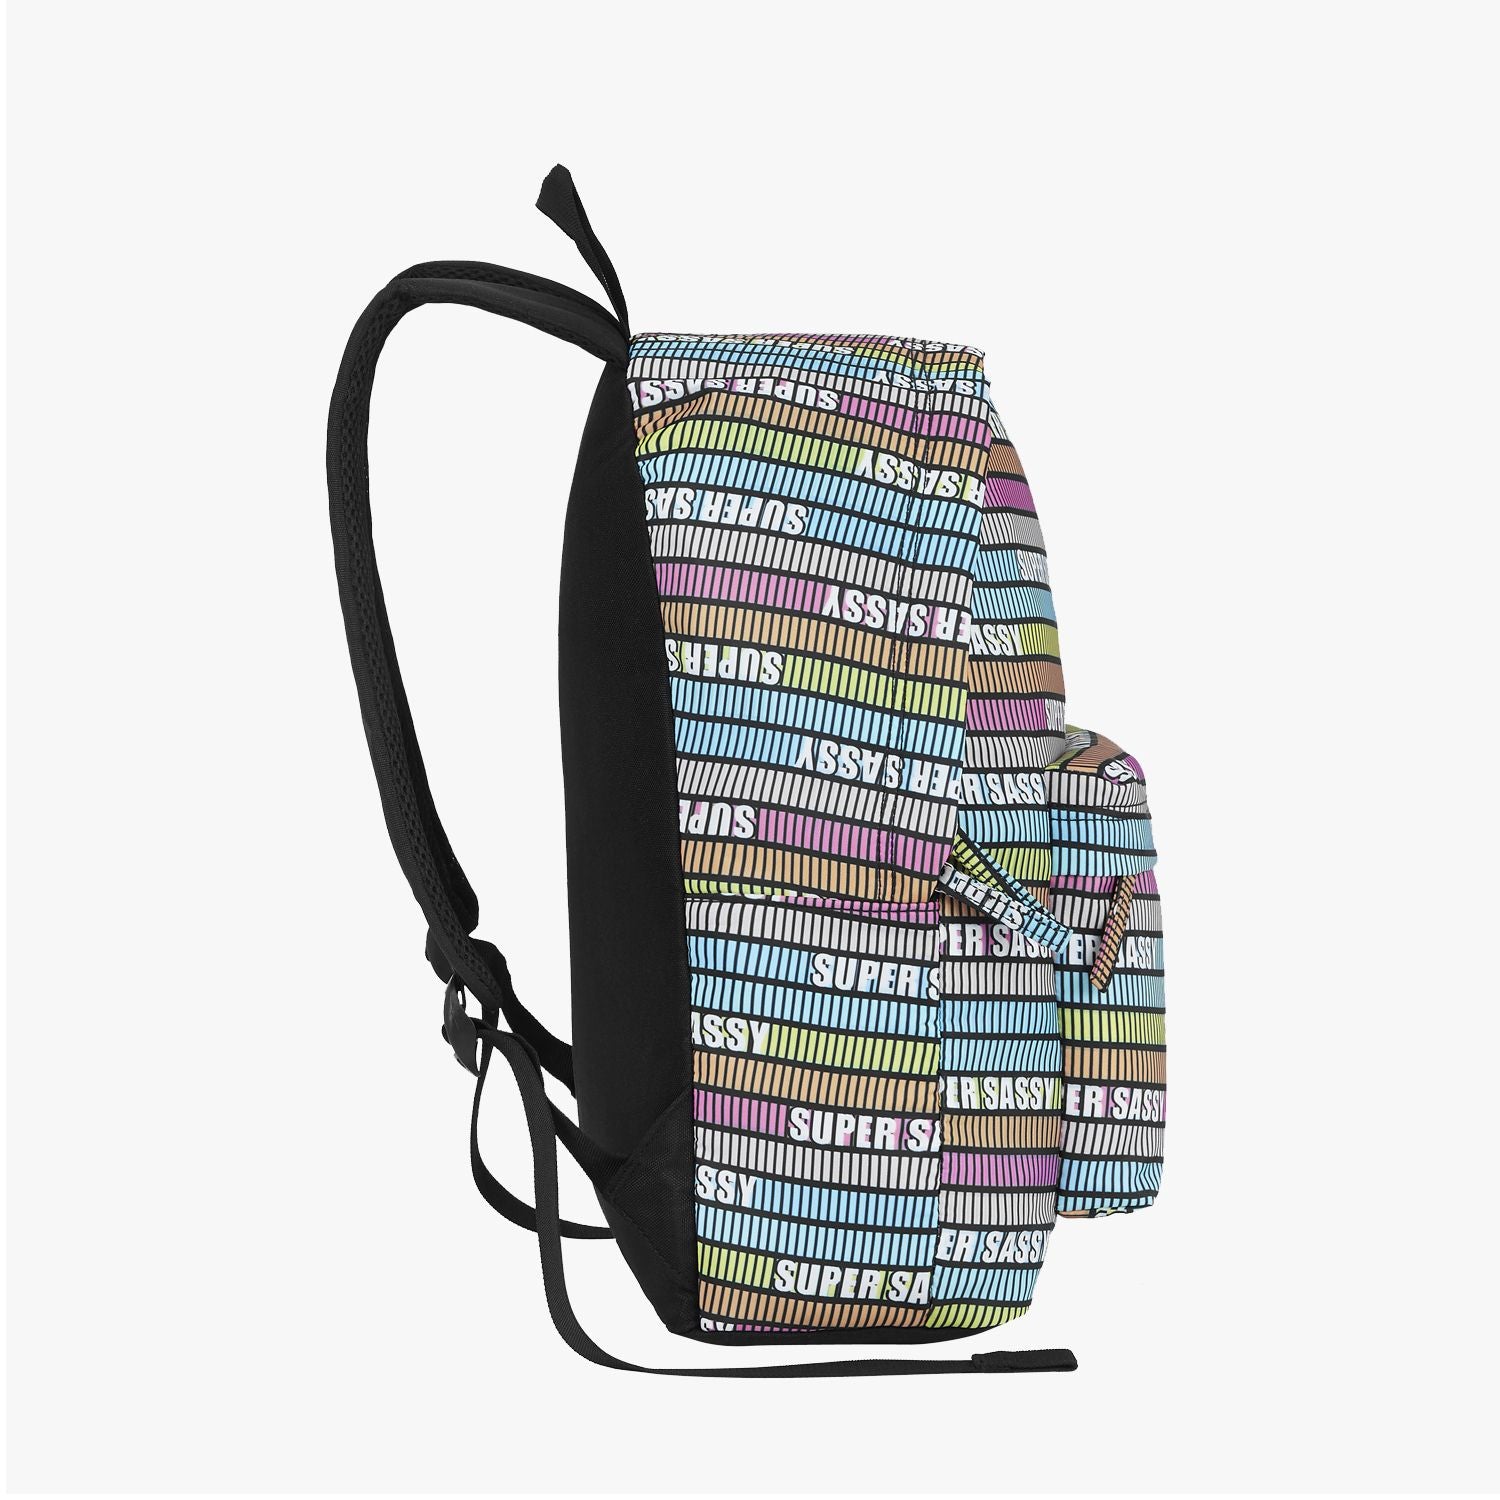 Genie Super Sassy 18L Multicolor Casual Backpack With Easy Access Pockets